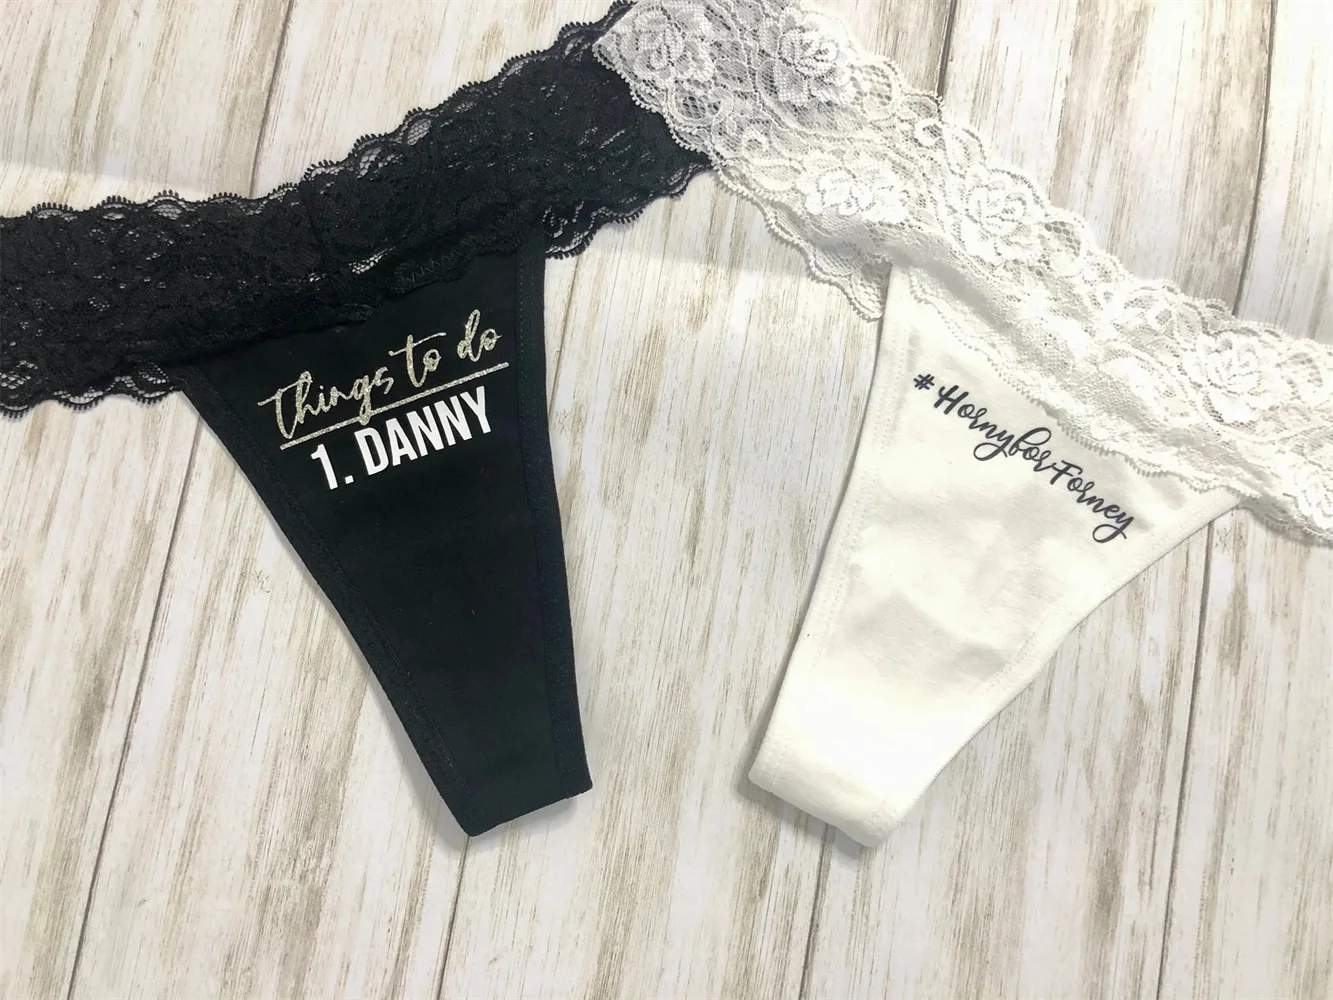 david pisa recommends funny panties for bride pic